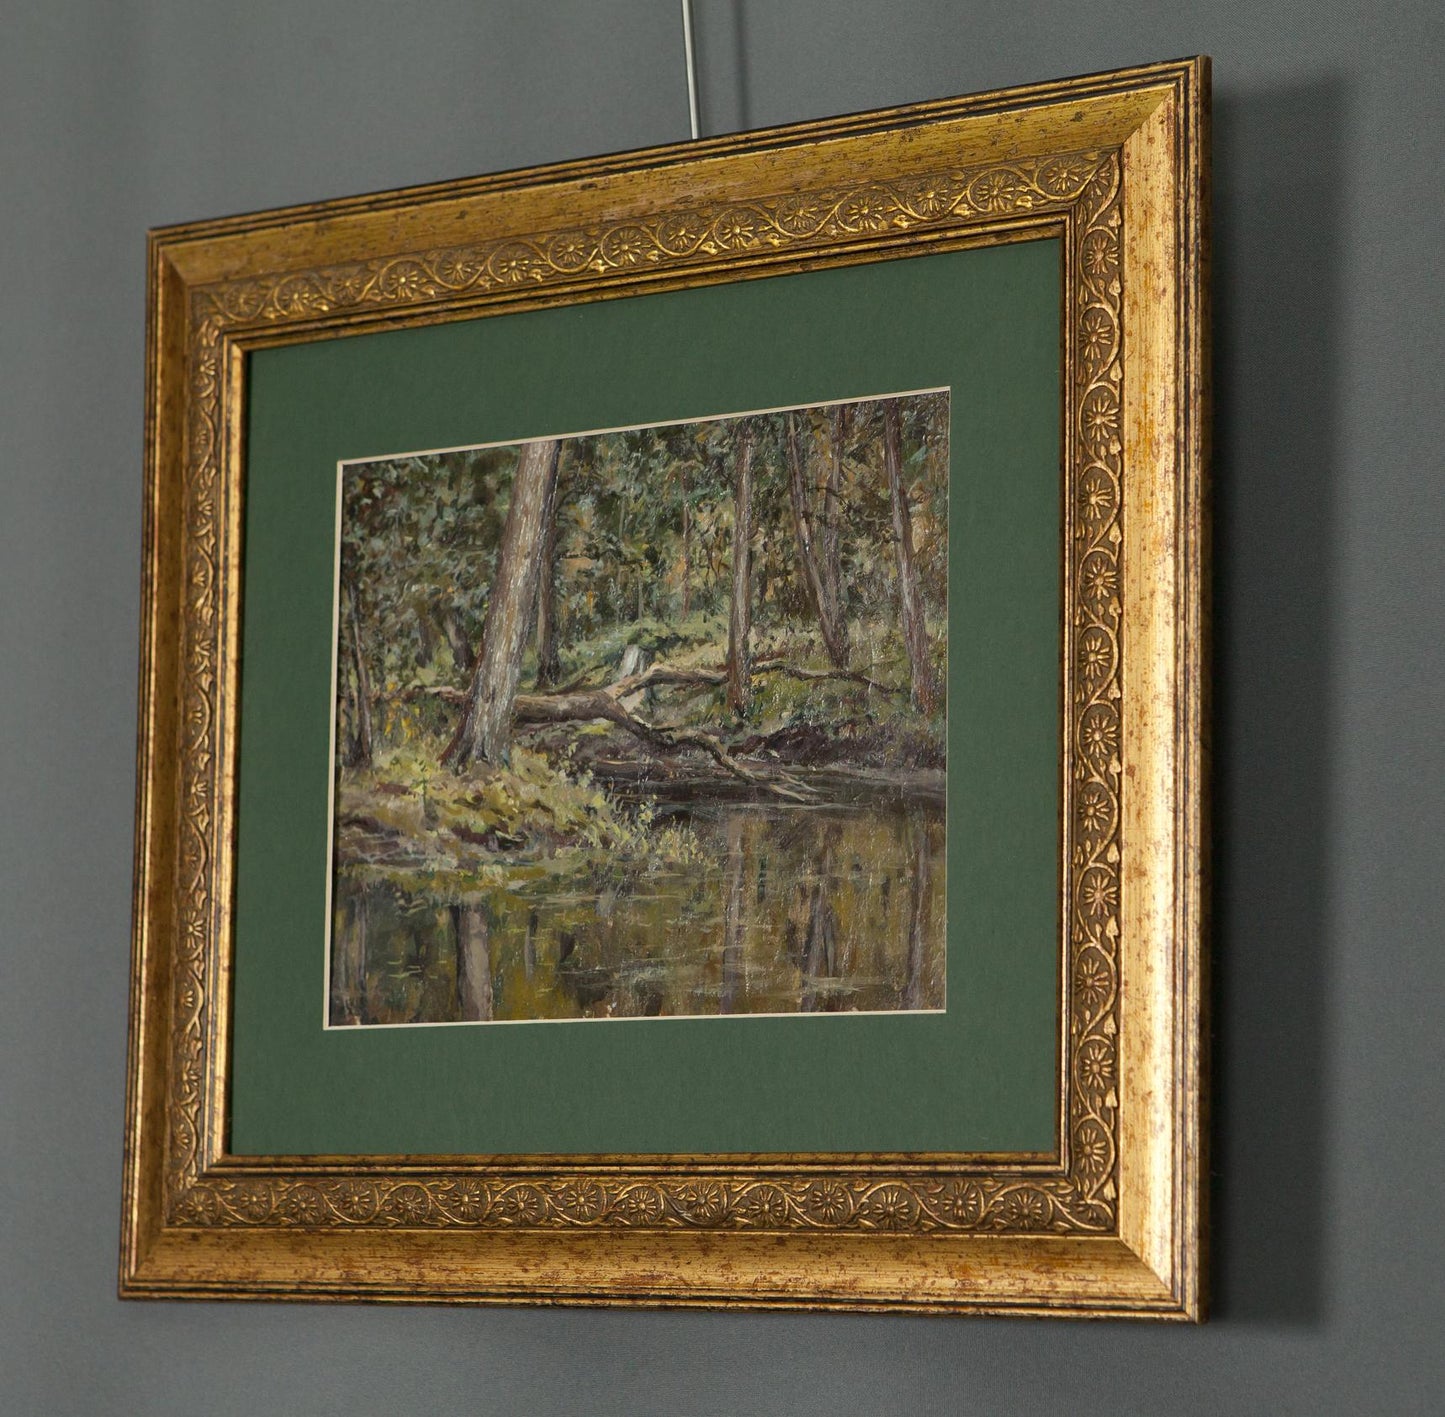 Swamp in the Forest: an oil painting